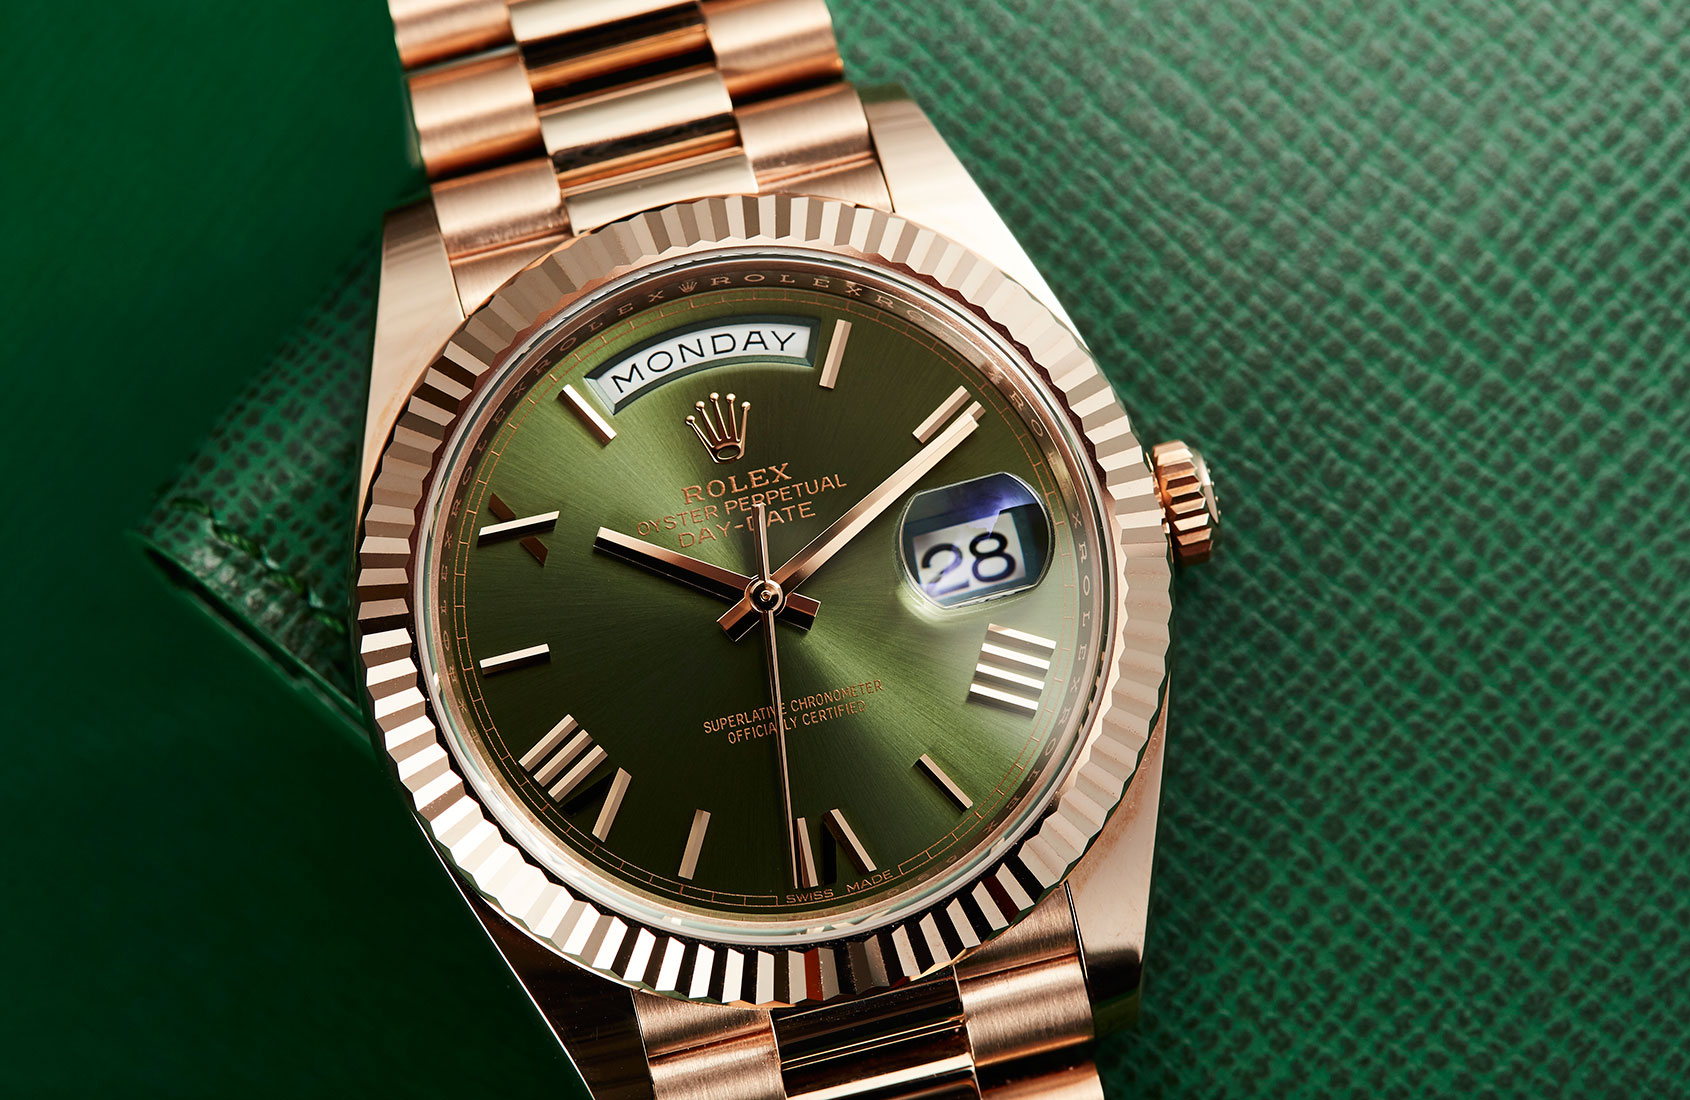 EDITOR’S PICK: What happens in a Rolex Service Centre? We visited one to find out…